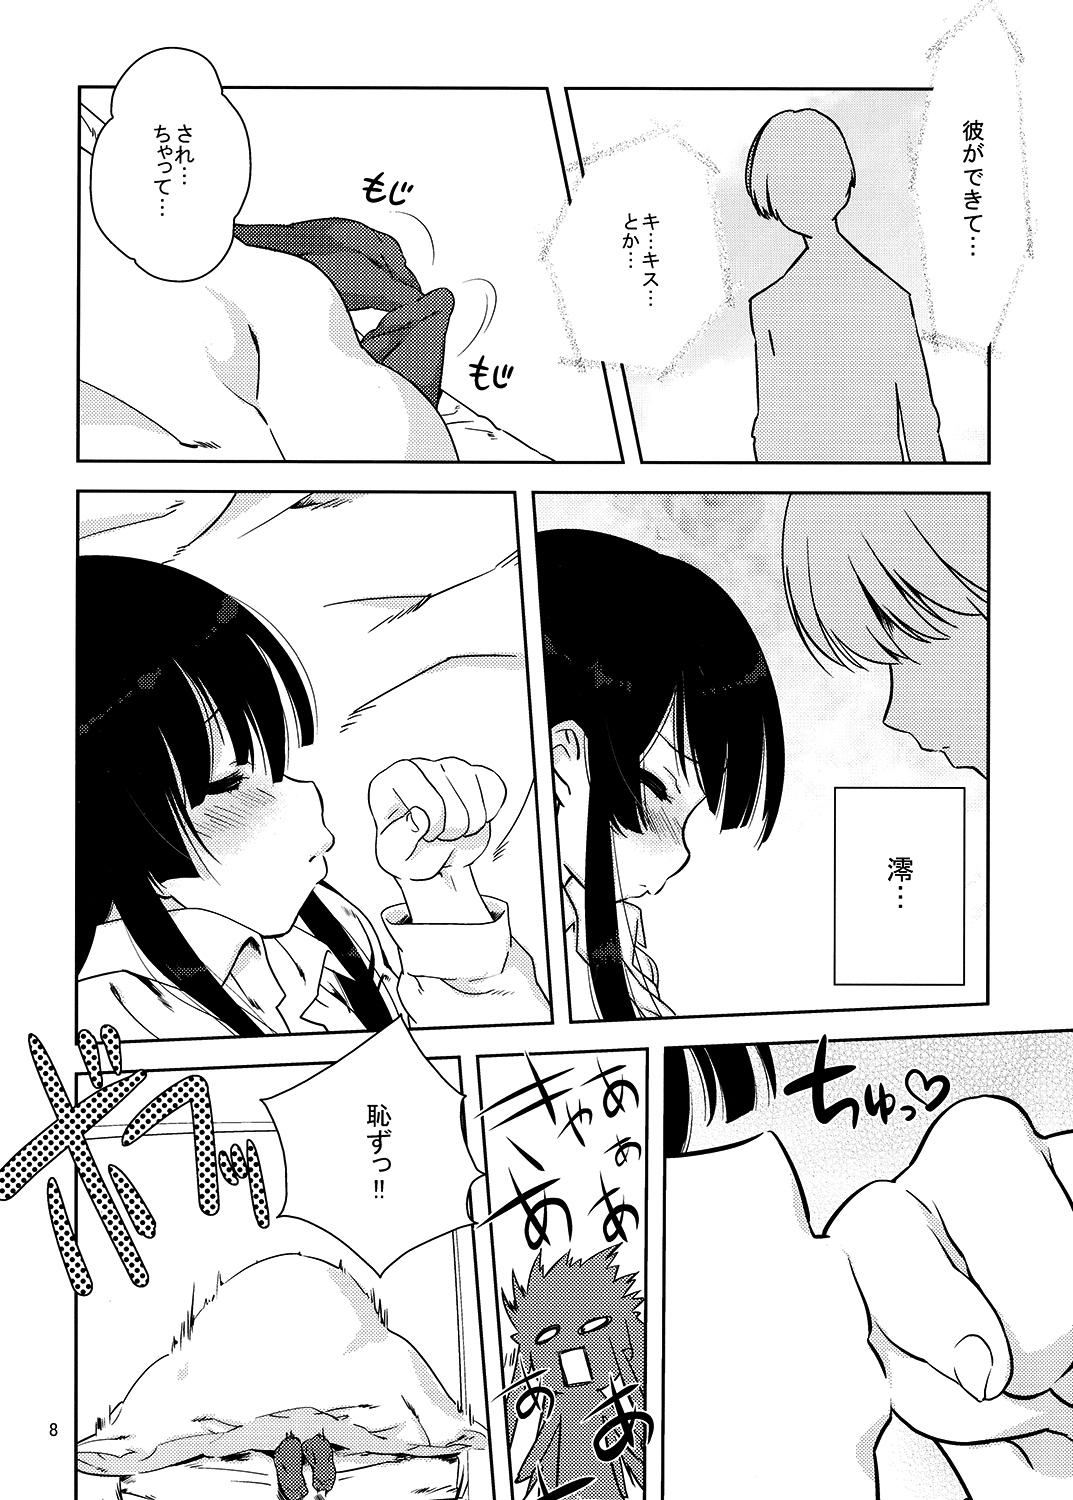 Pussyfucking Mio-tan! - K on Indian - Page 7